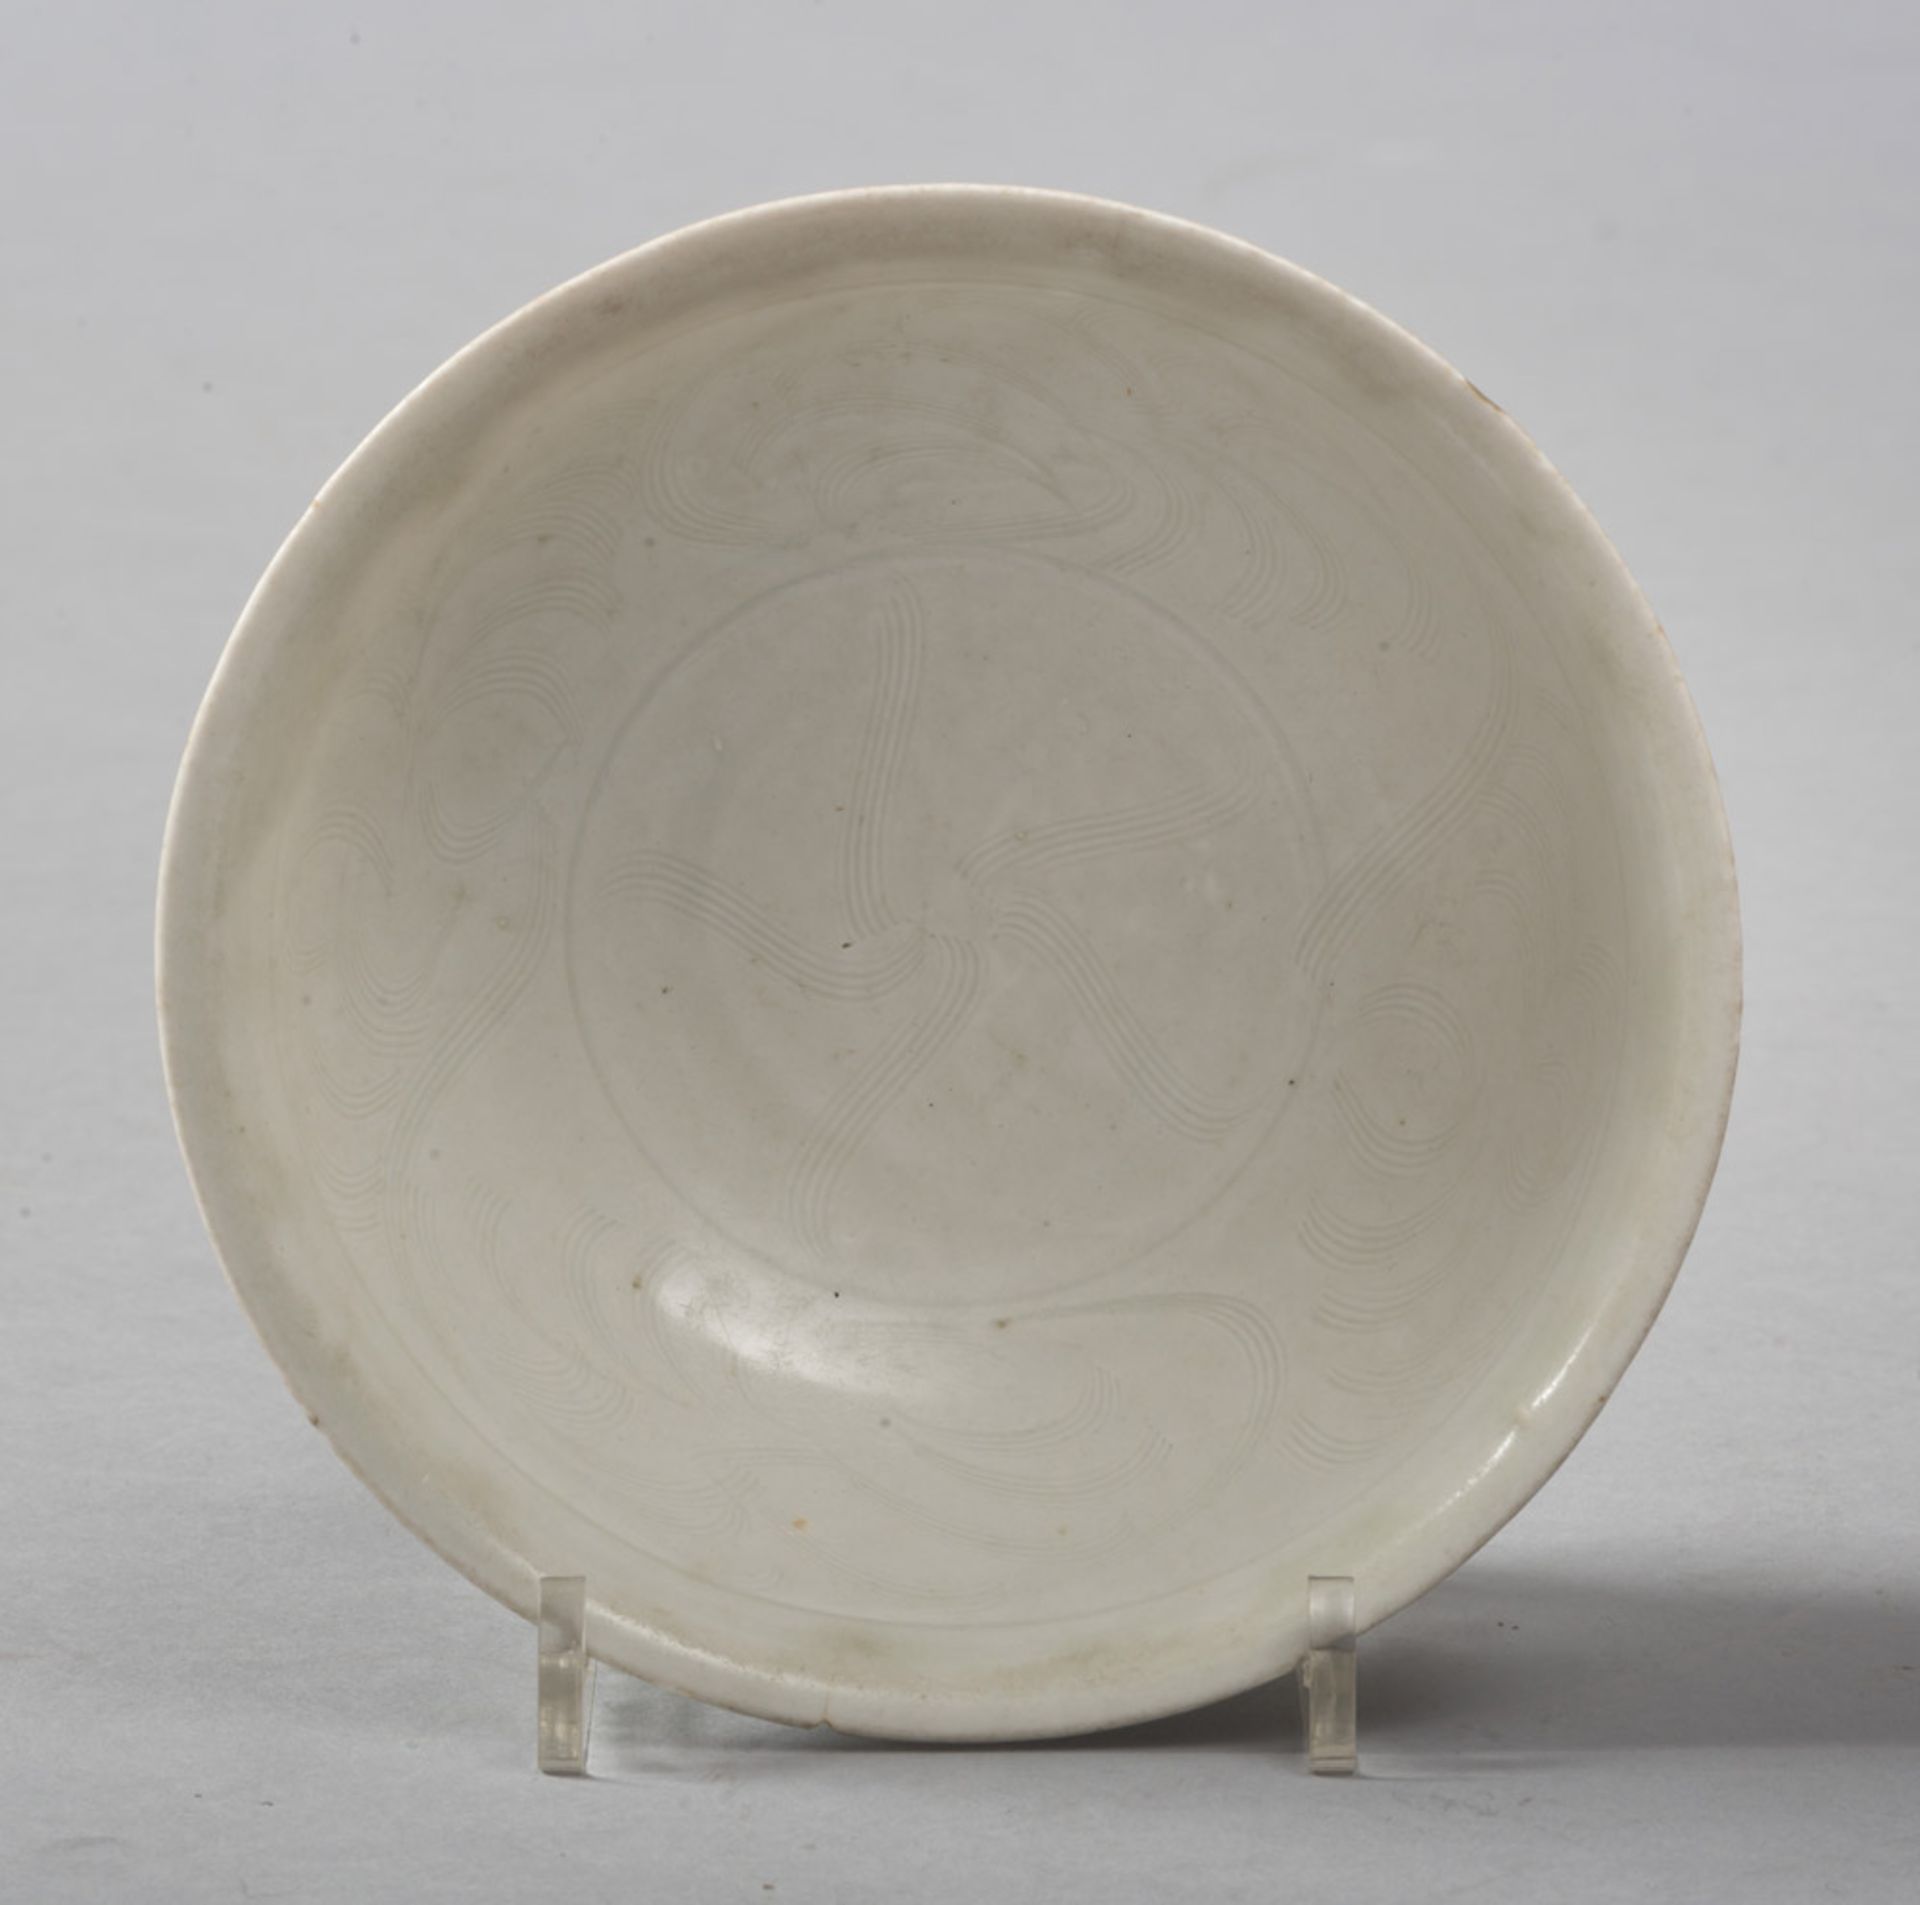 A CHINESE GLAZED STONEWARE BOWL. 12TH-14TH CENTURY.